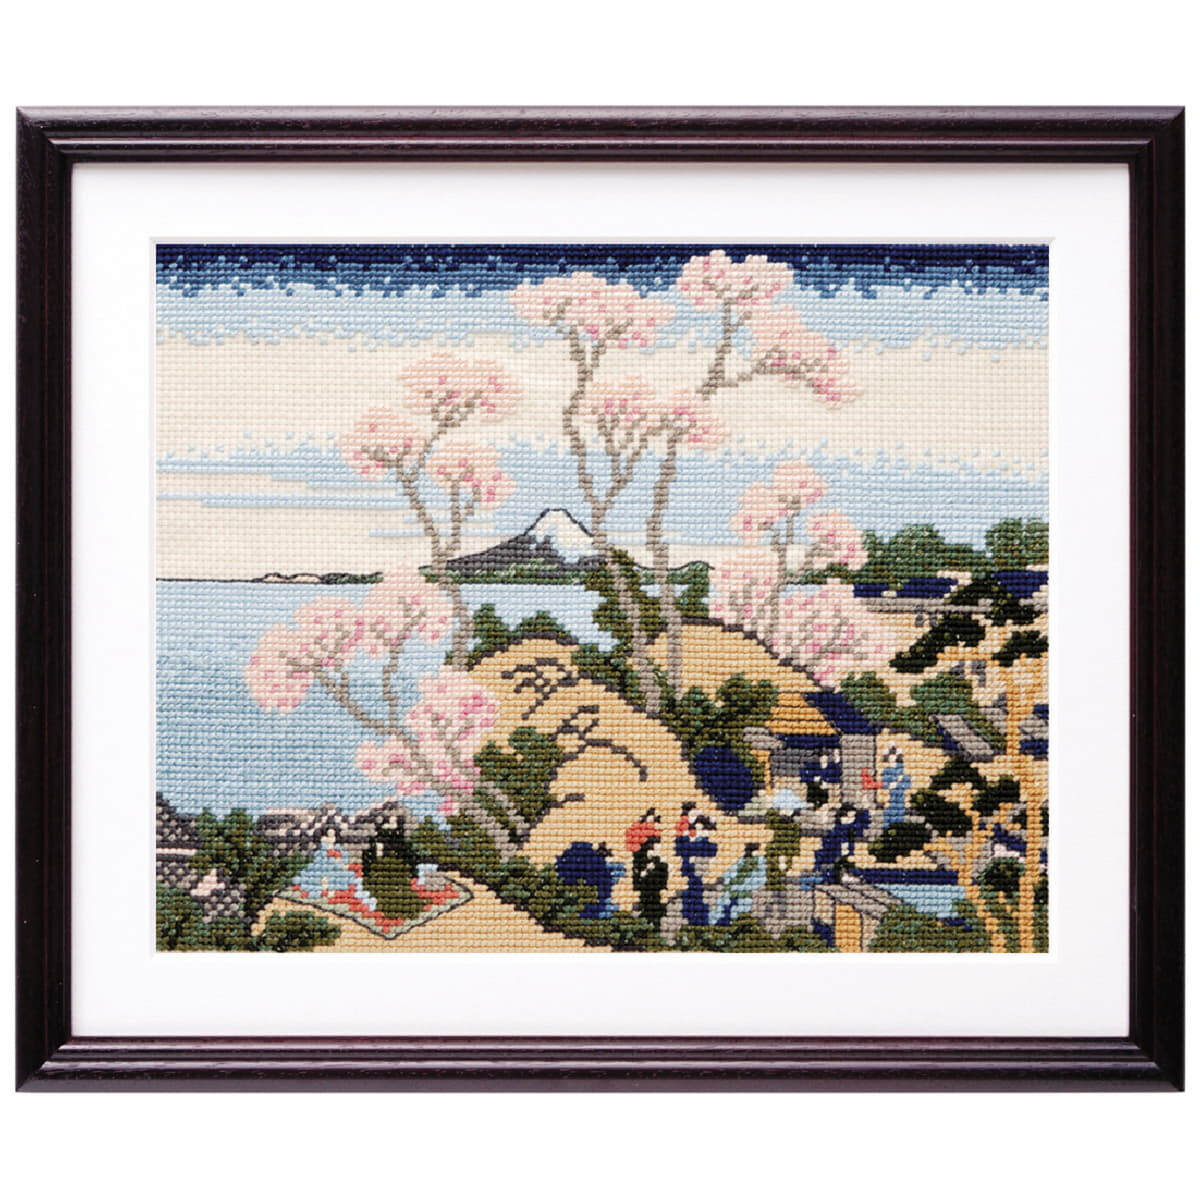 Olympus counted cross stitch kit "Fuji from...